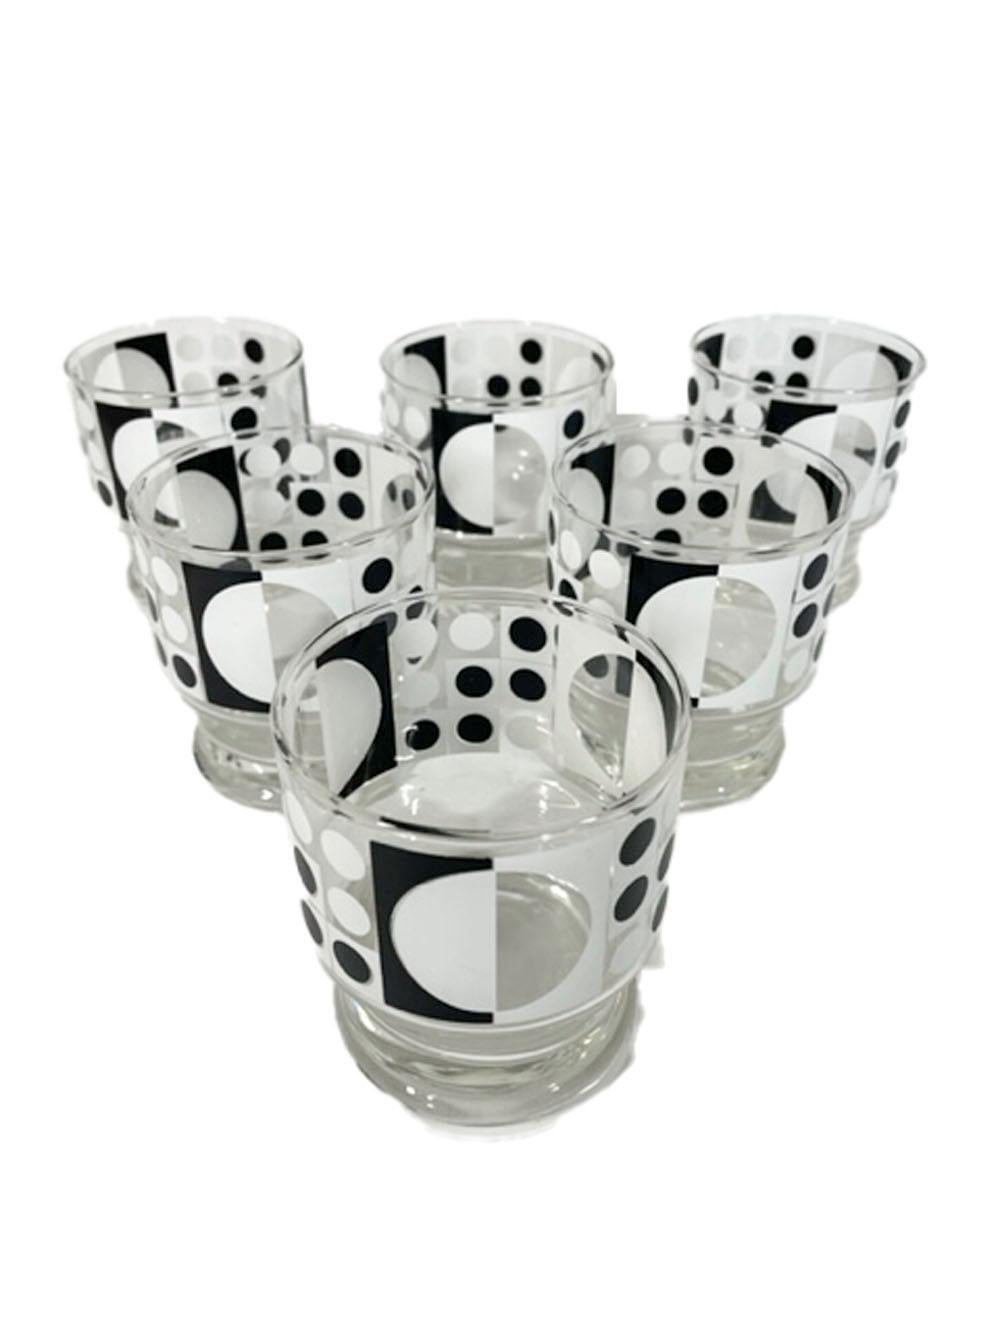 Vintage Op-Art Cocktail Set from the Bartrix Line by Cera in a Panton Pattern For Sale 2